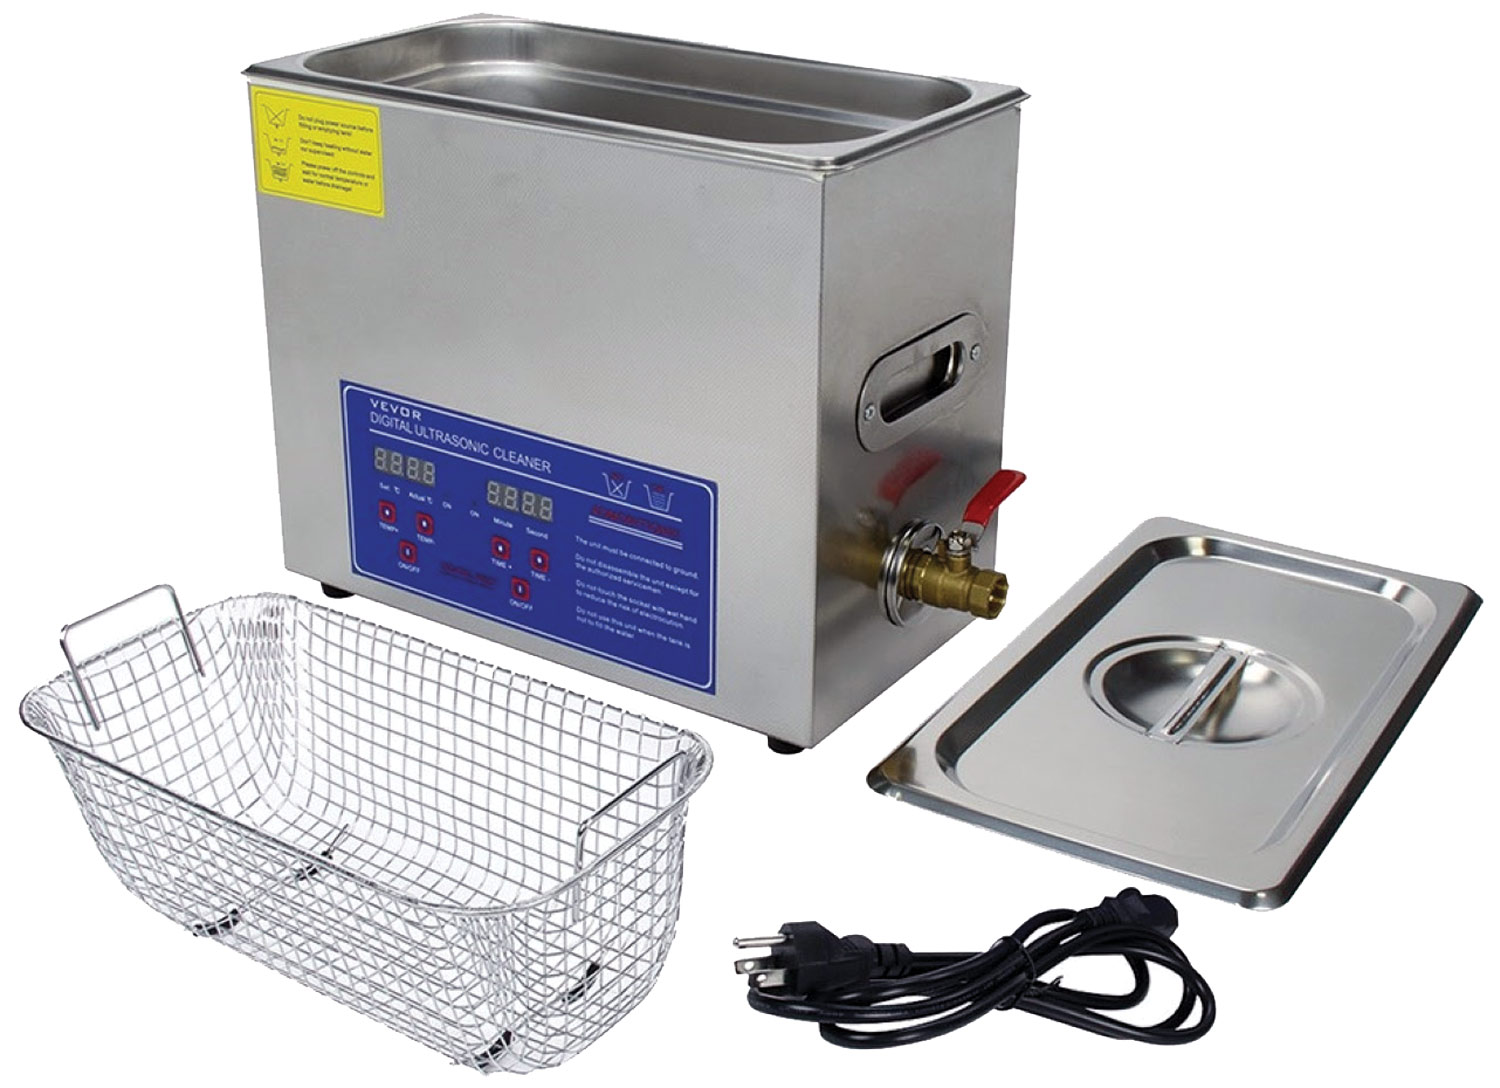 Allstar Performance Ultrasonic Cleaner parts on display